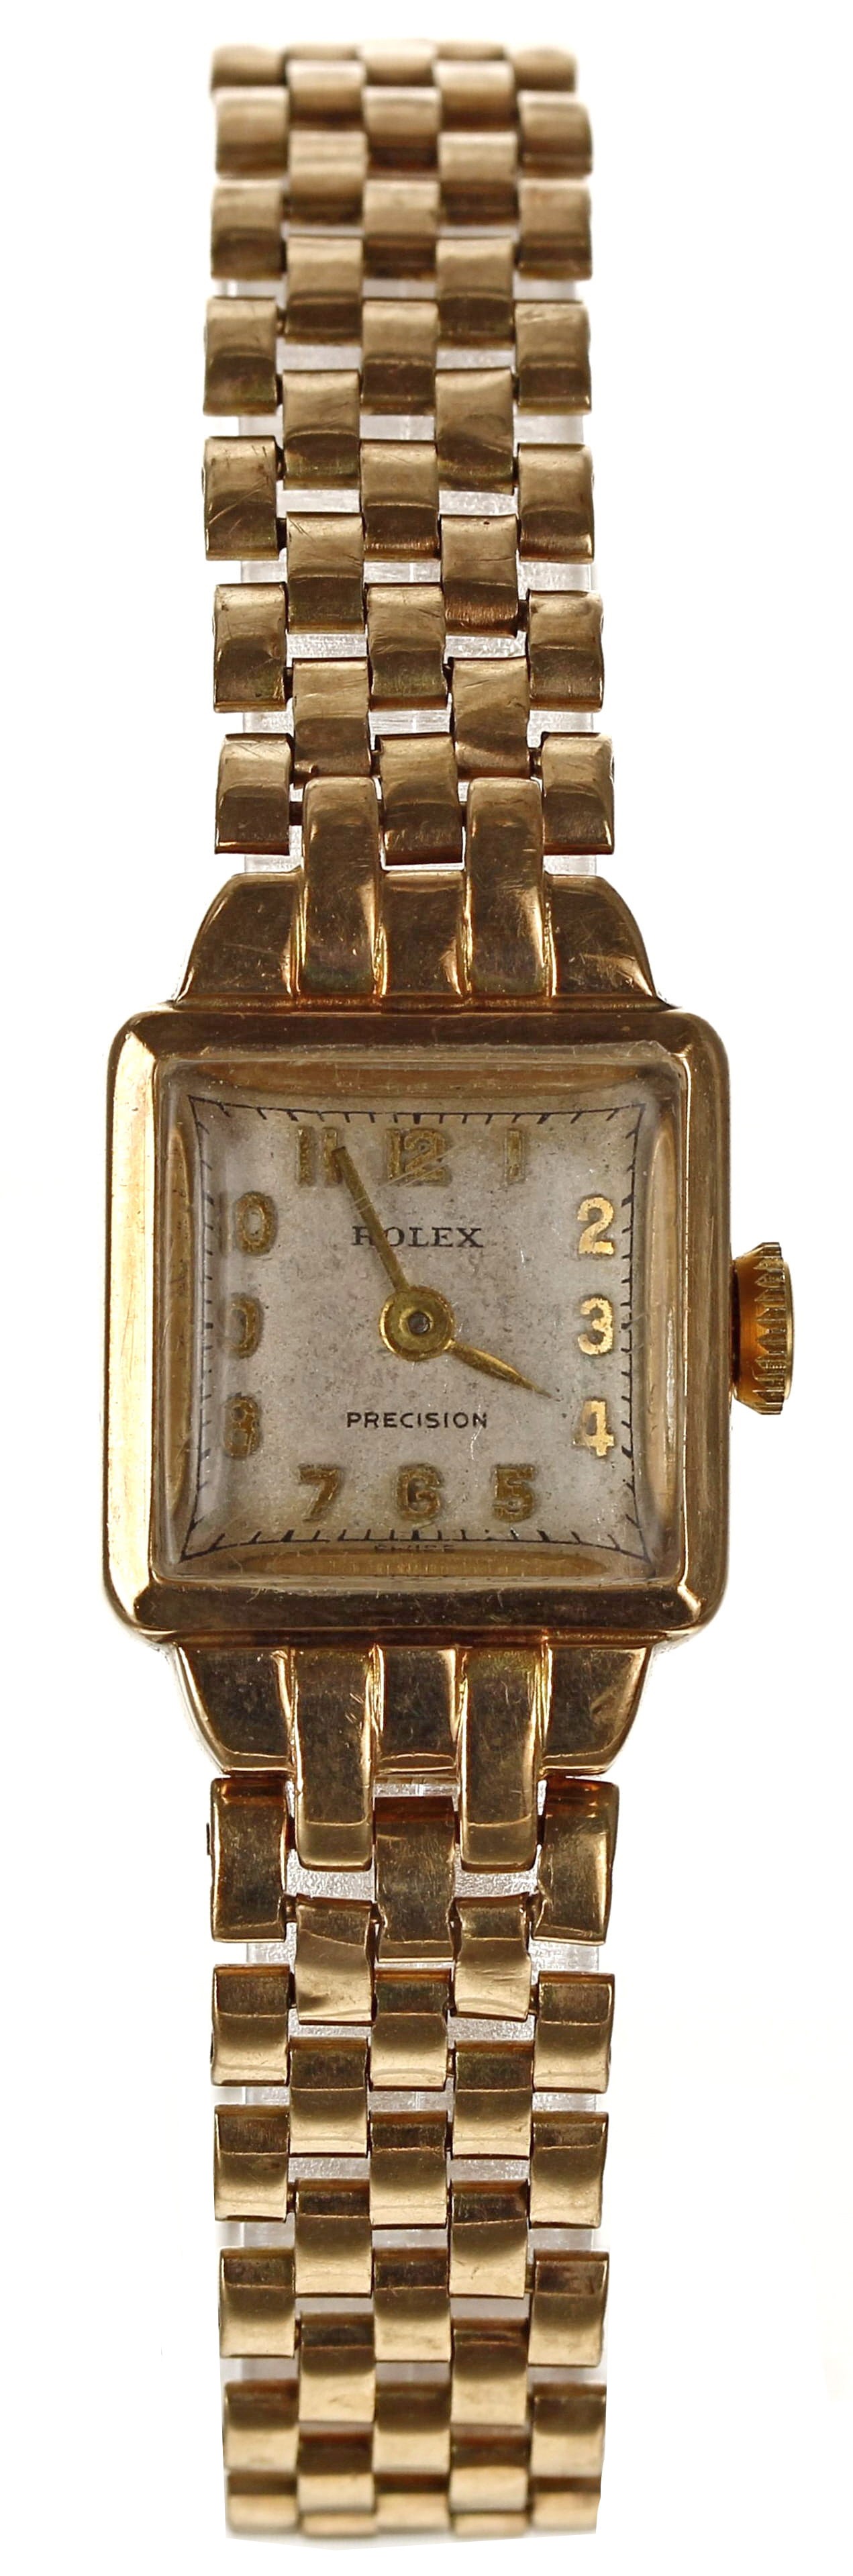 Rolex Precision 9ct square cased lady's wristwatch, Chester 1952, case no. 173906, signed squared